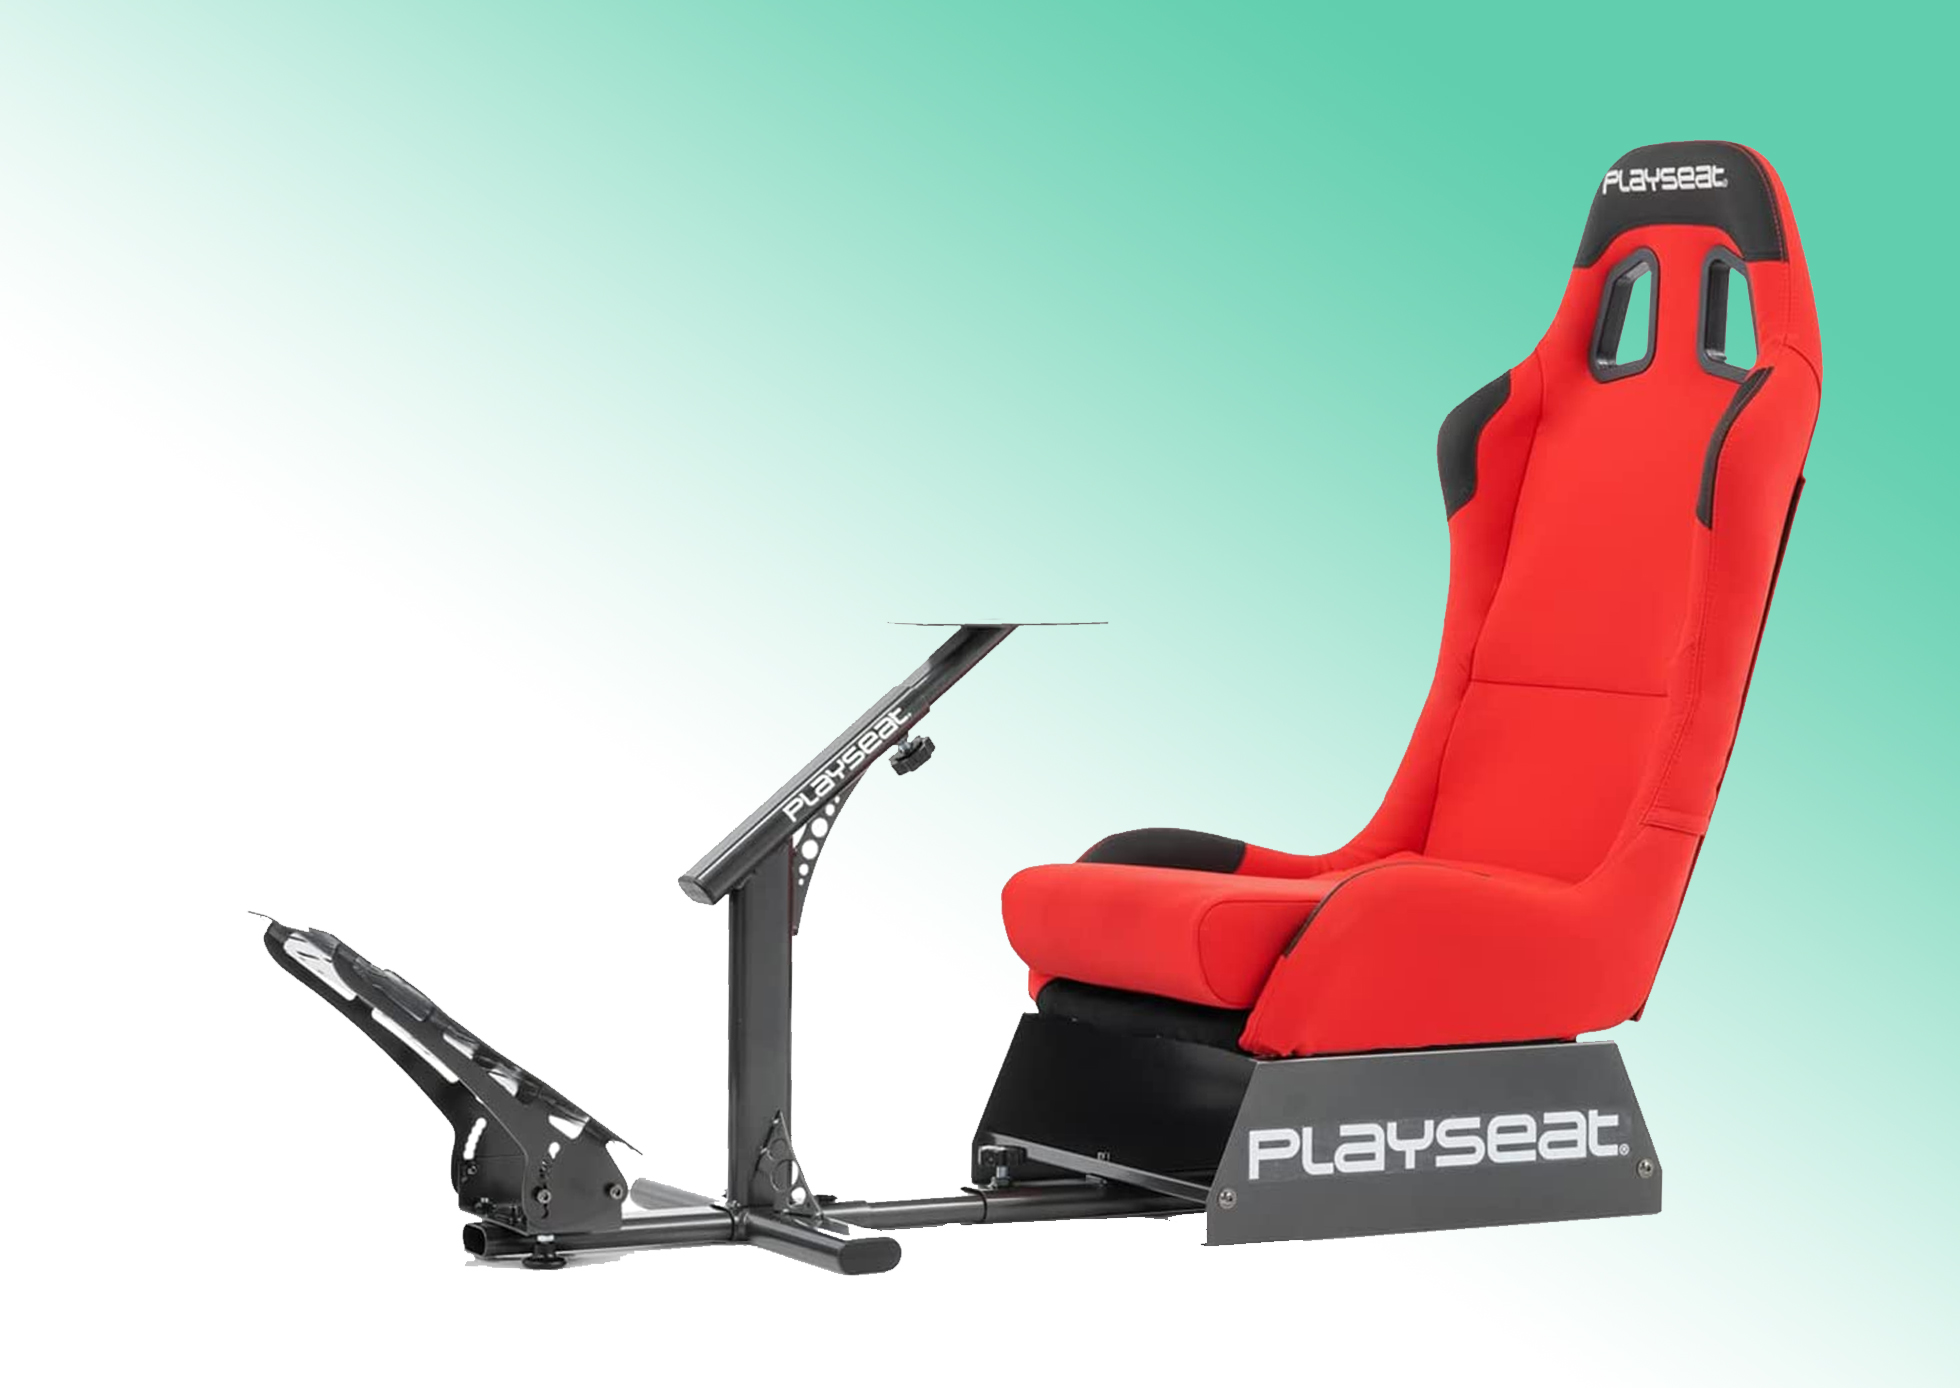 Test and review of the PlaySeat Evolution Alcantara seat